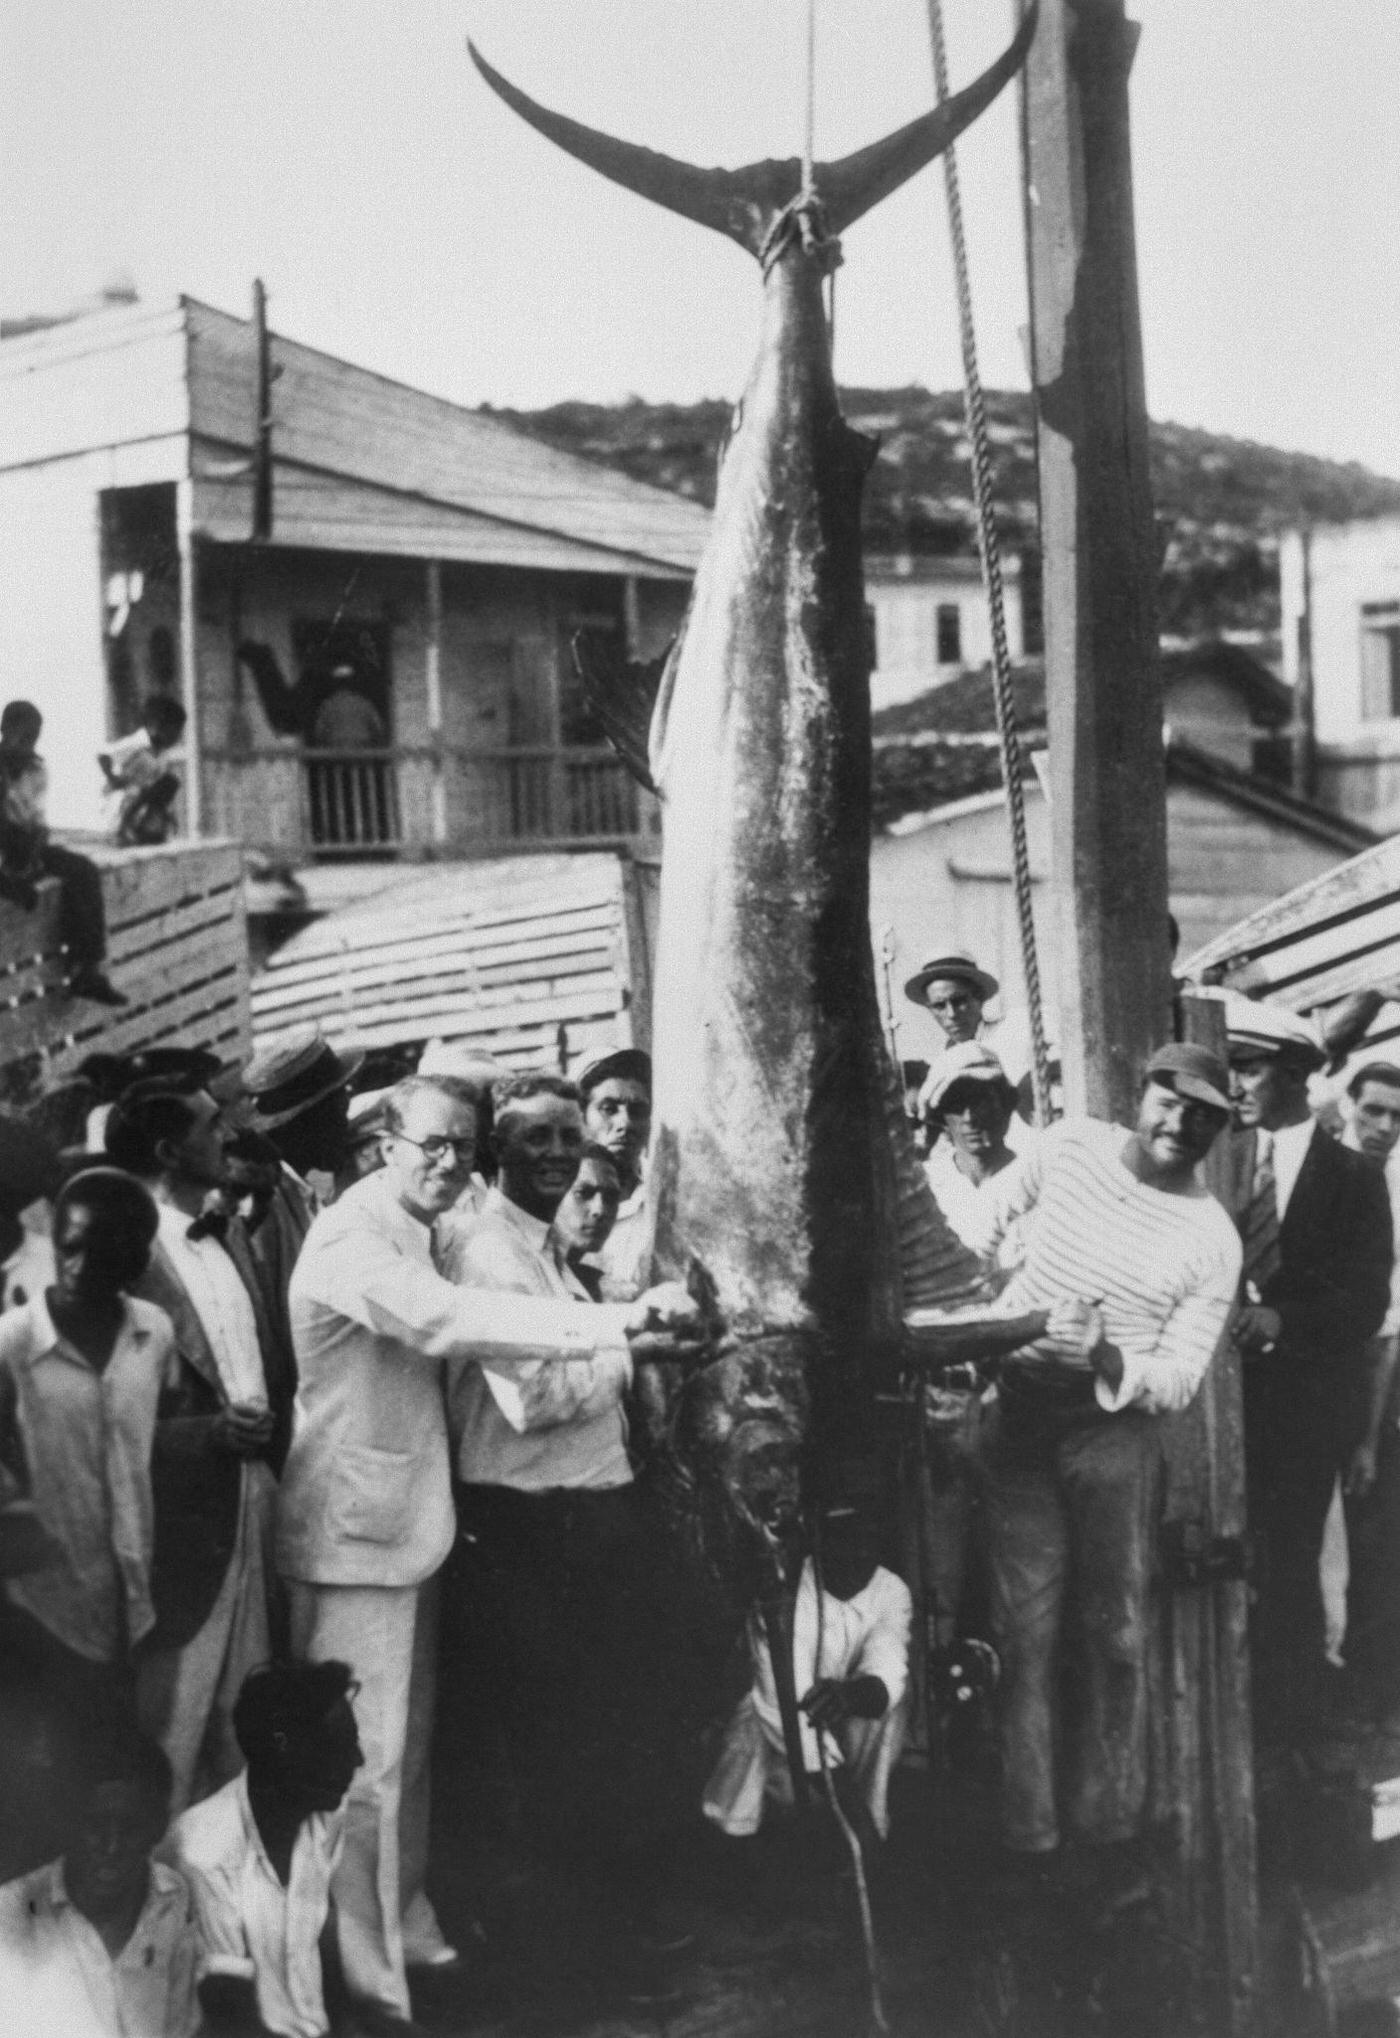 Ernest Hemingway with the record-breaking Black Marlin he caught off the Cuban coast, 1930